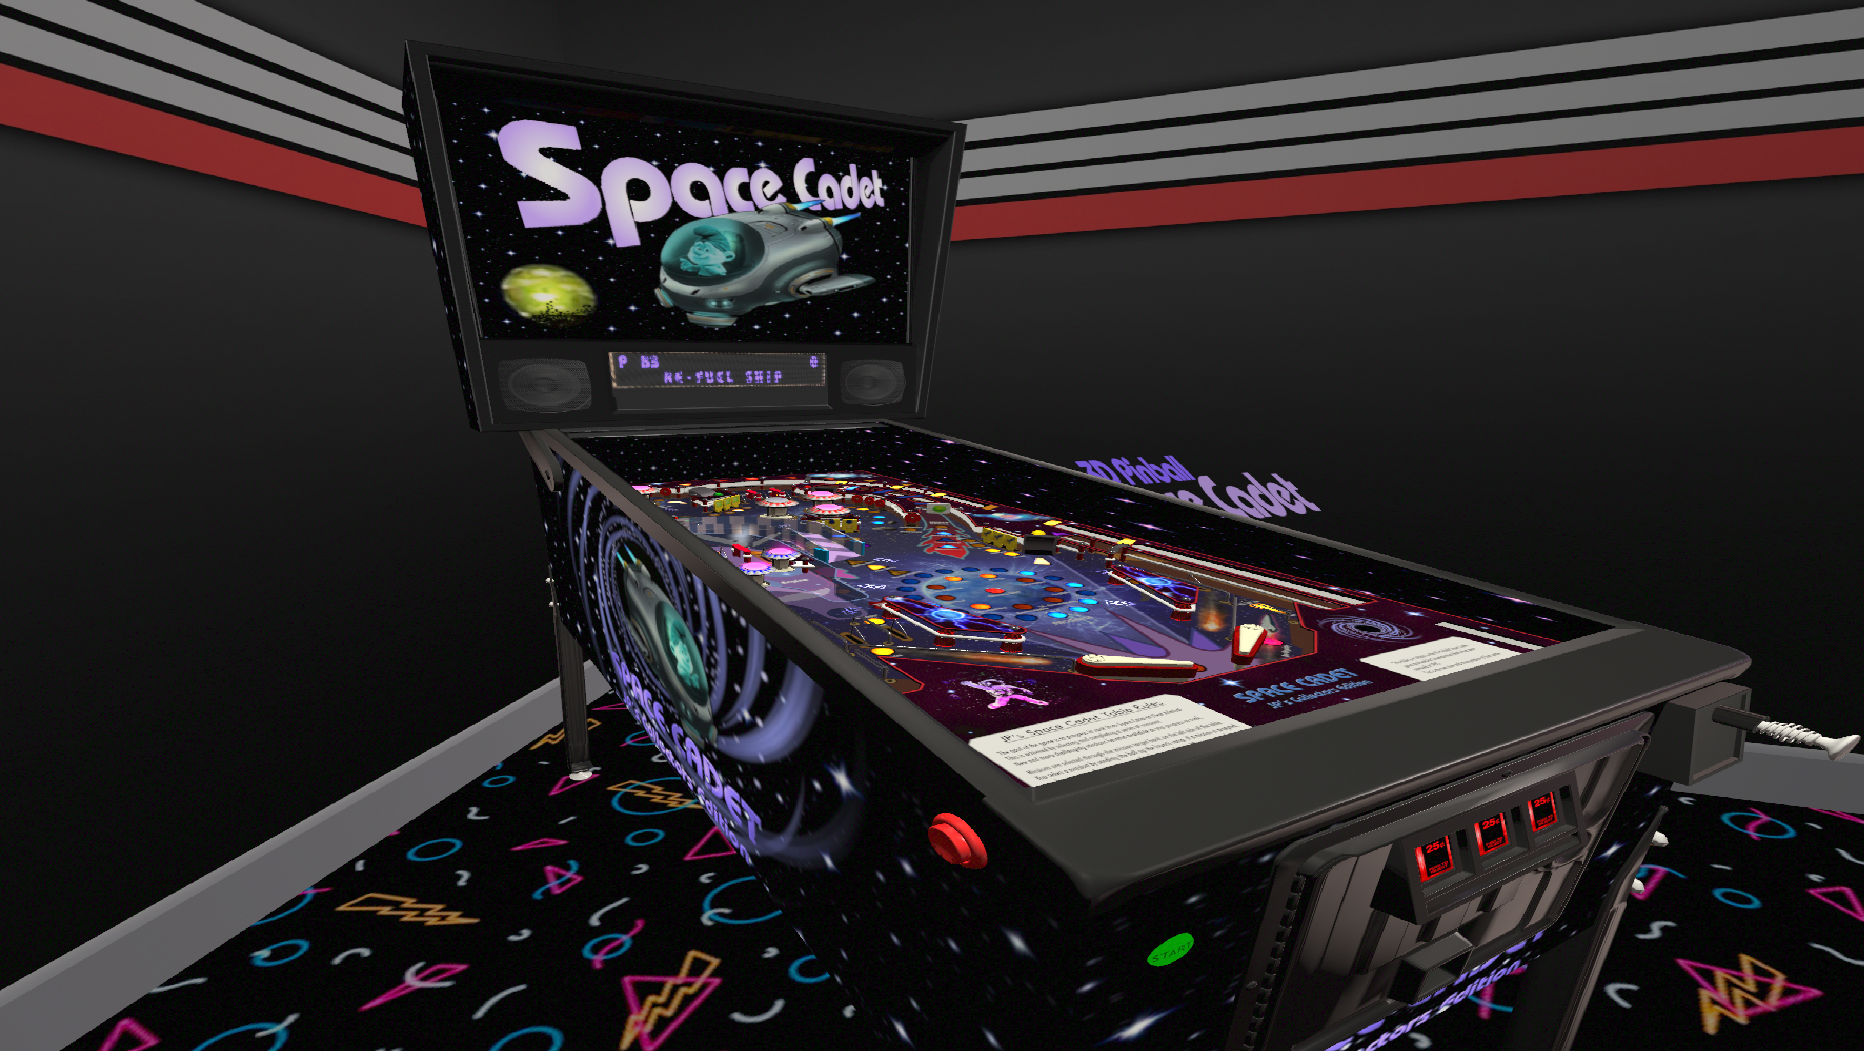 Pinball 3D - Space Cadet, Compatibility Database